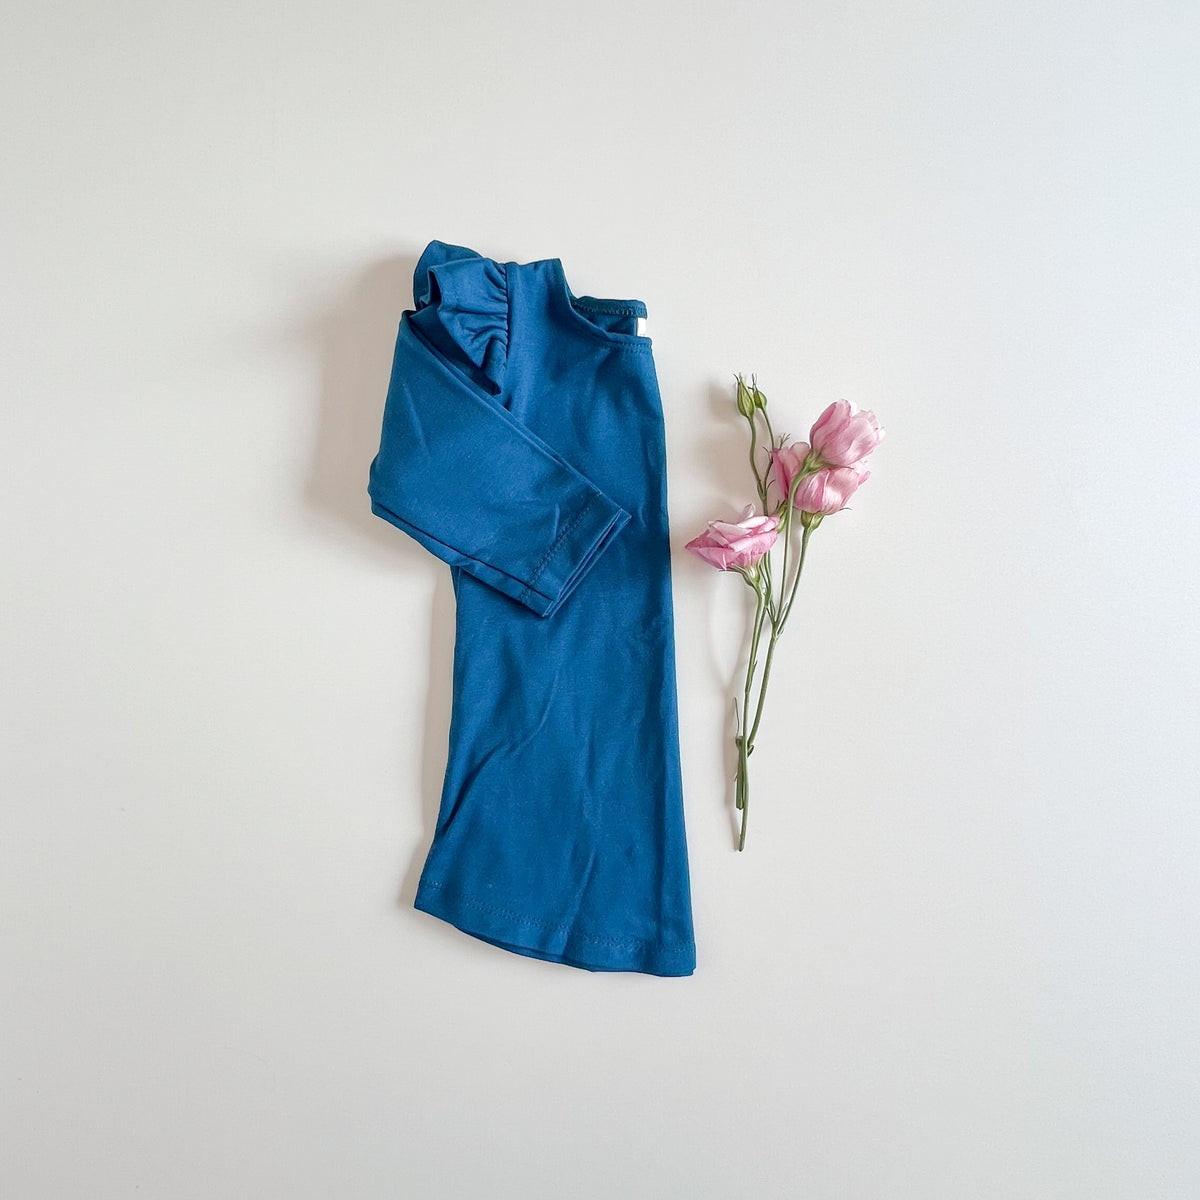 Millie Flutter Shirt in 'Cerulean' - Ready To Ship